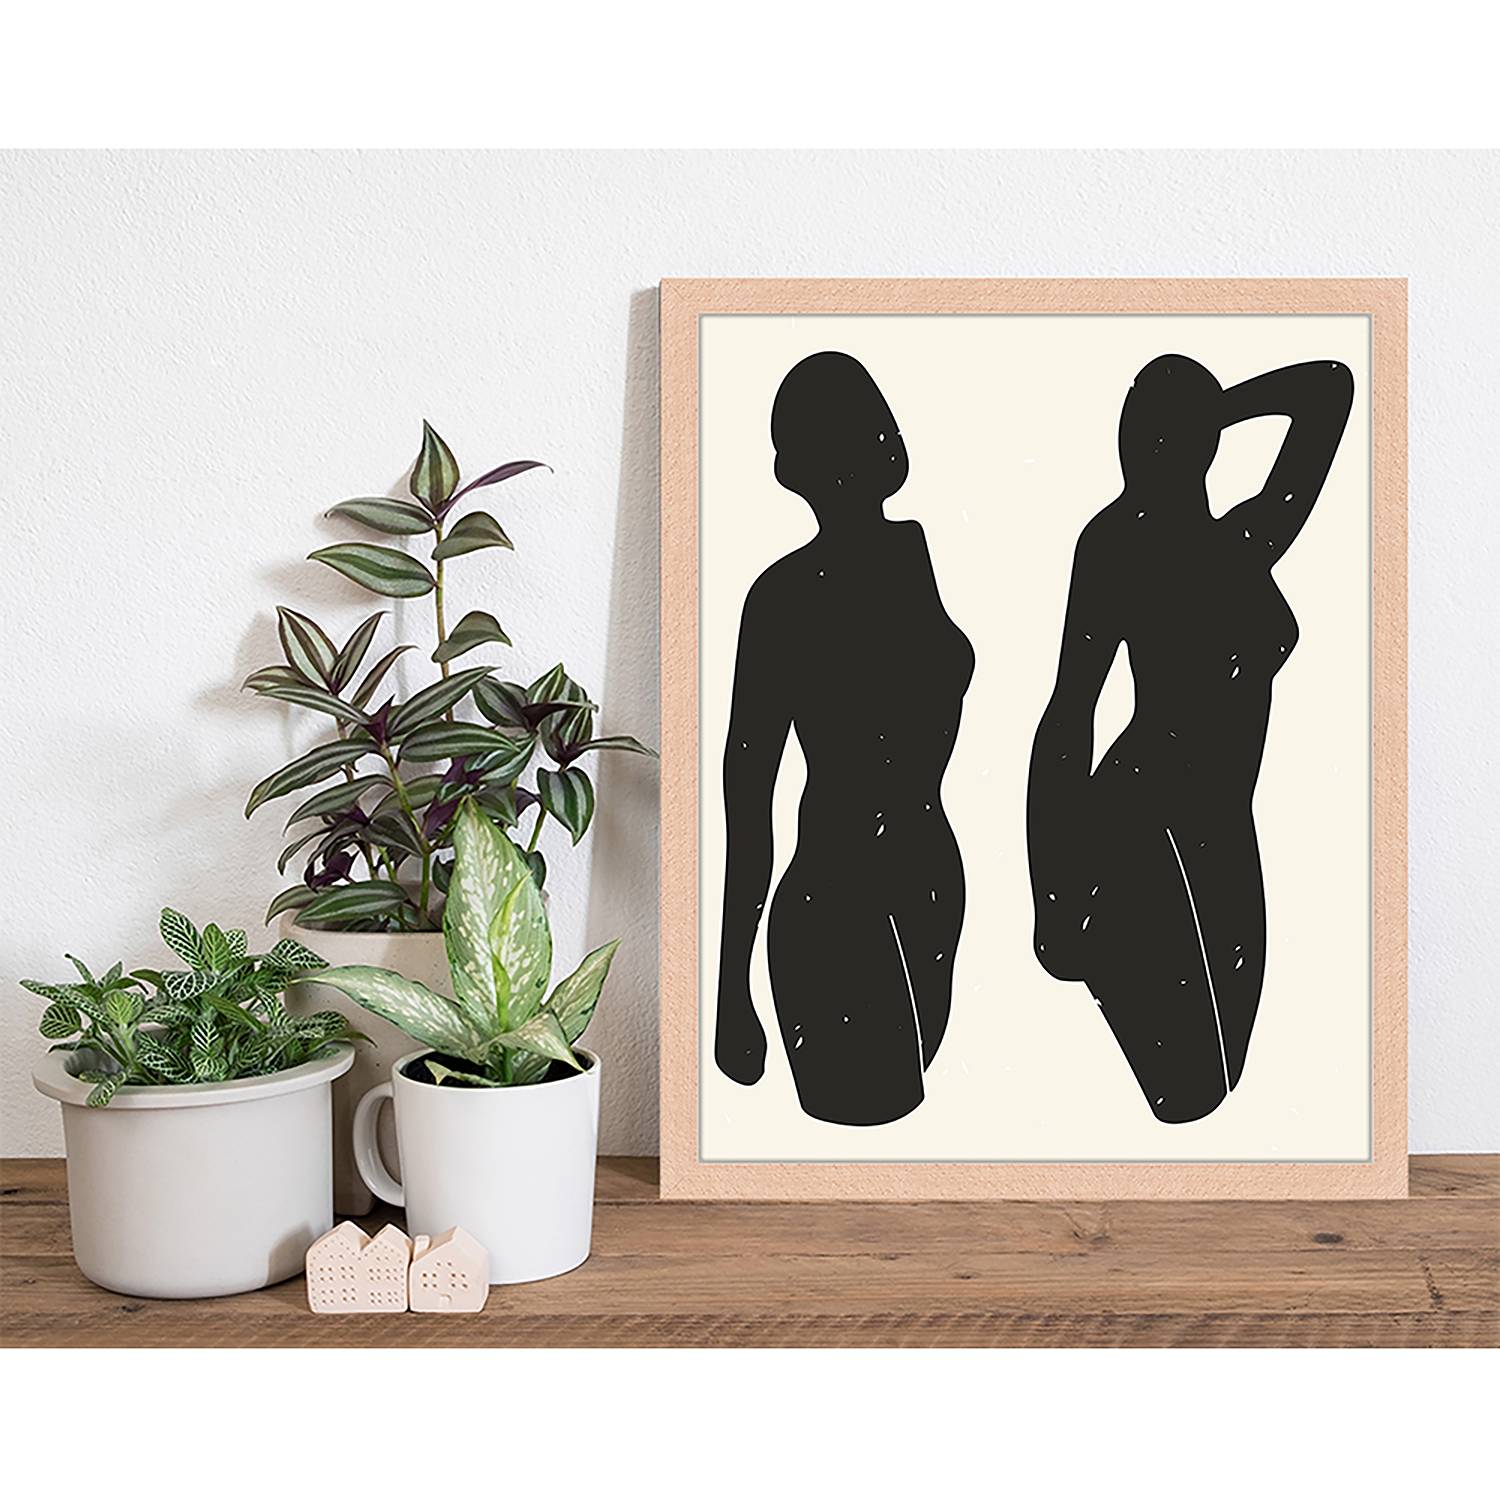 Image of Tableau déco Abstract Black Bodies 000000001000280363